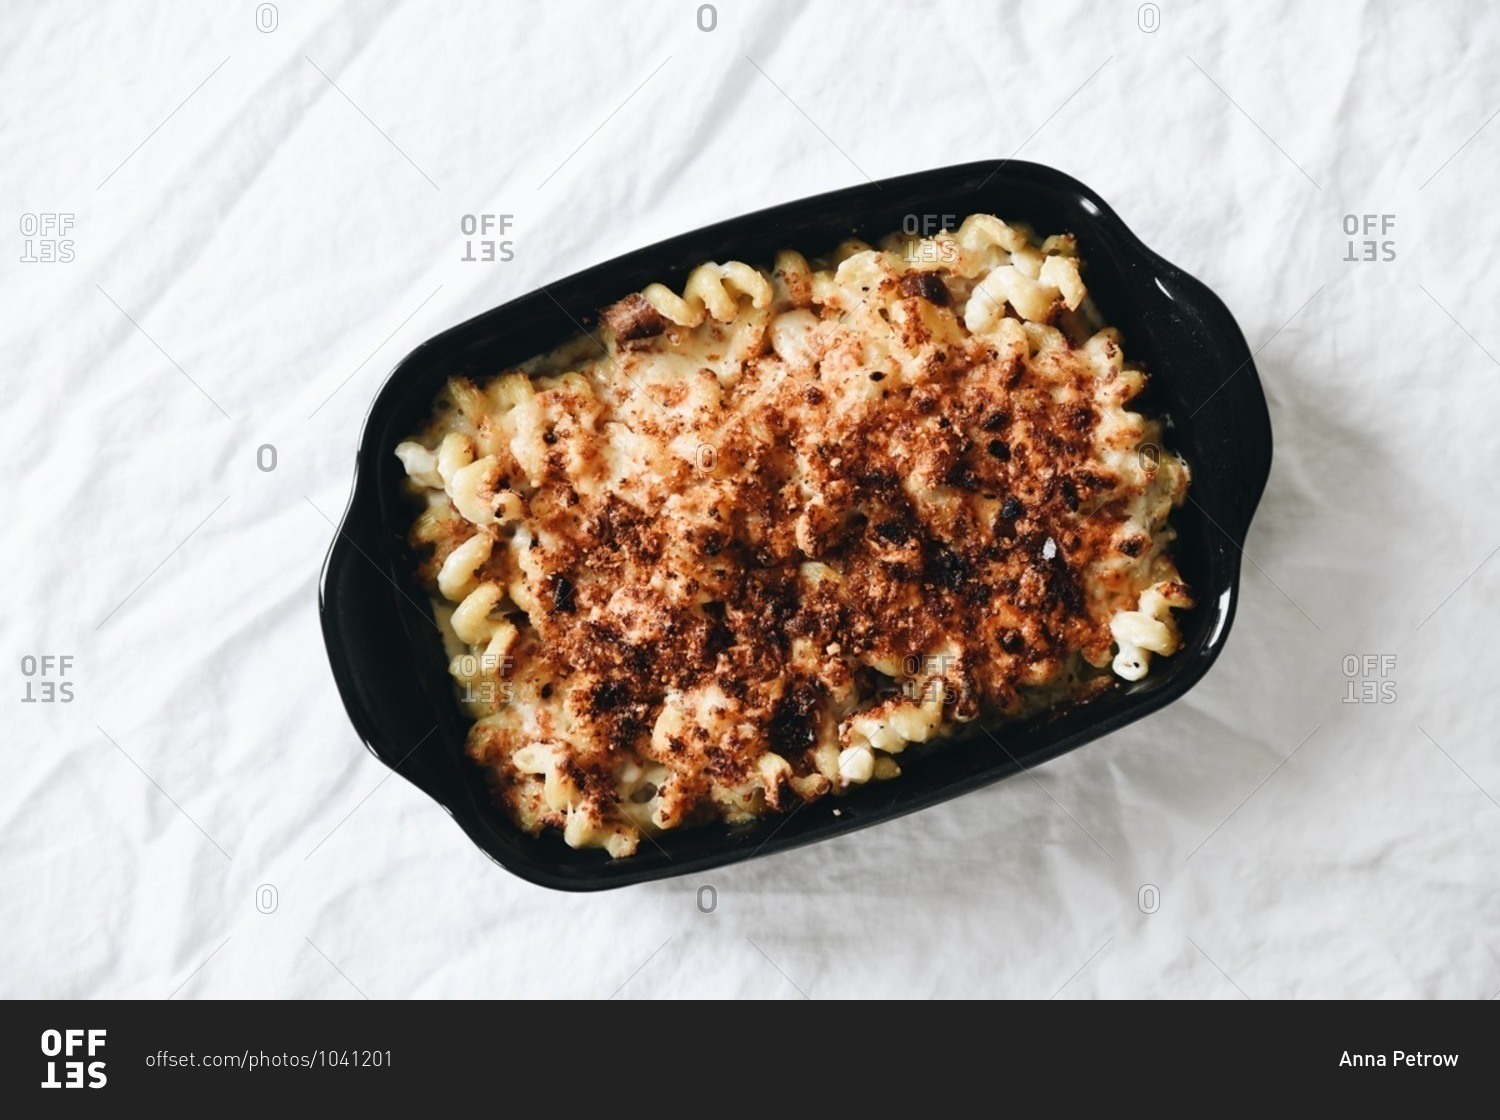 Overhead view of a baked macaroni and cheese dish with spiral noodles